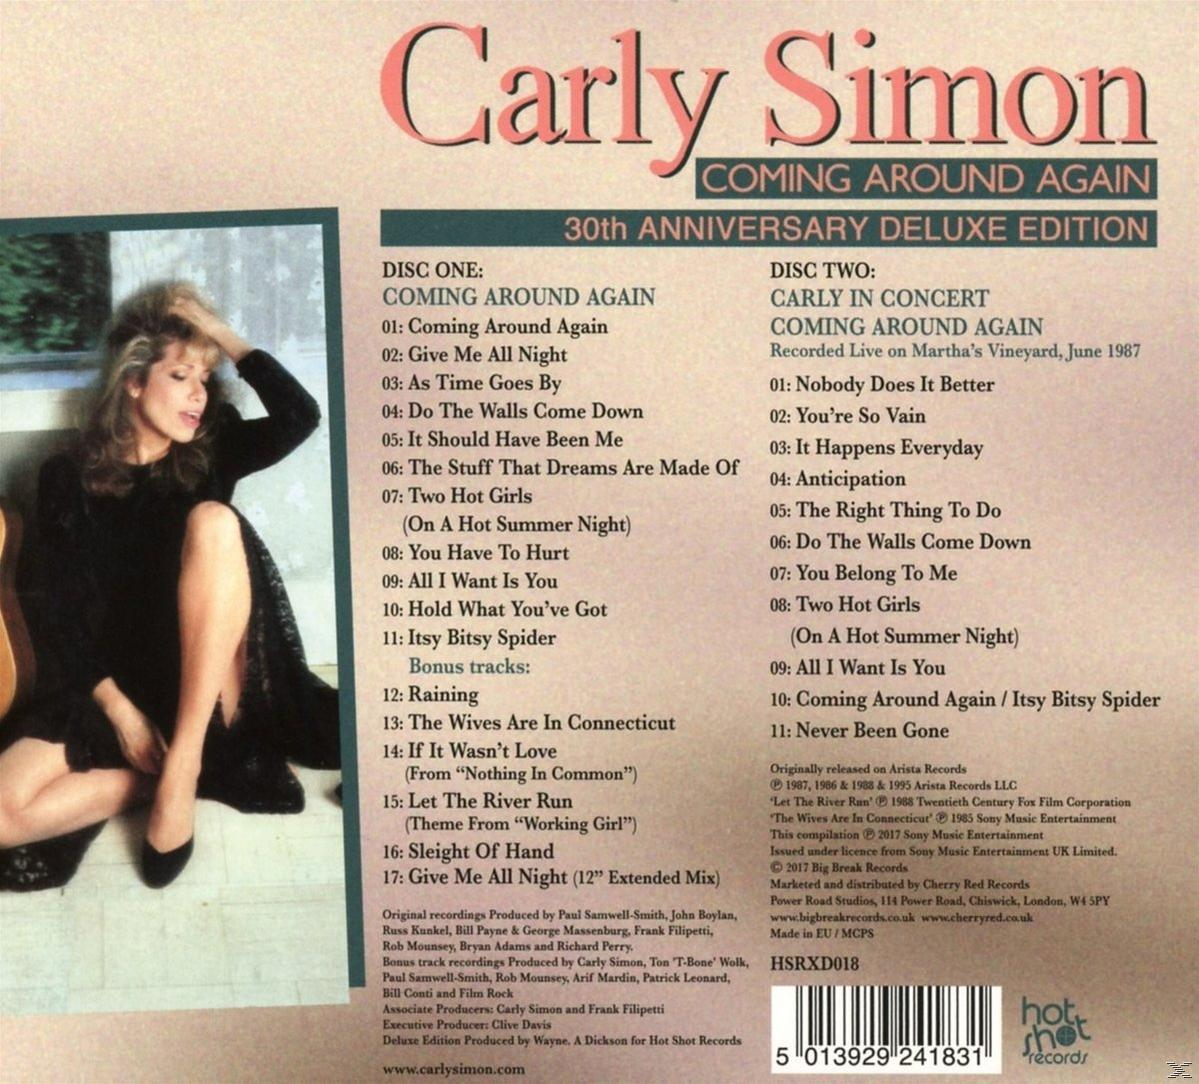 Carly Simon Edition) 2CD (Deluxe - (CD) Around Again Coming 